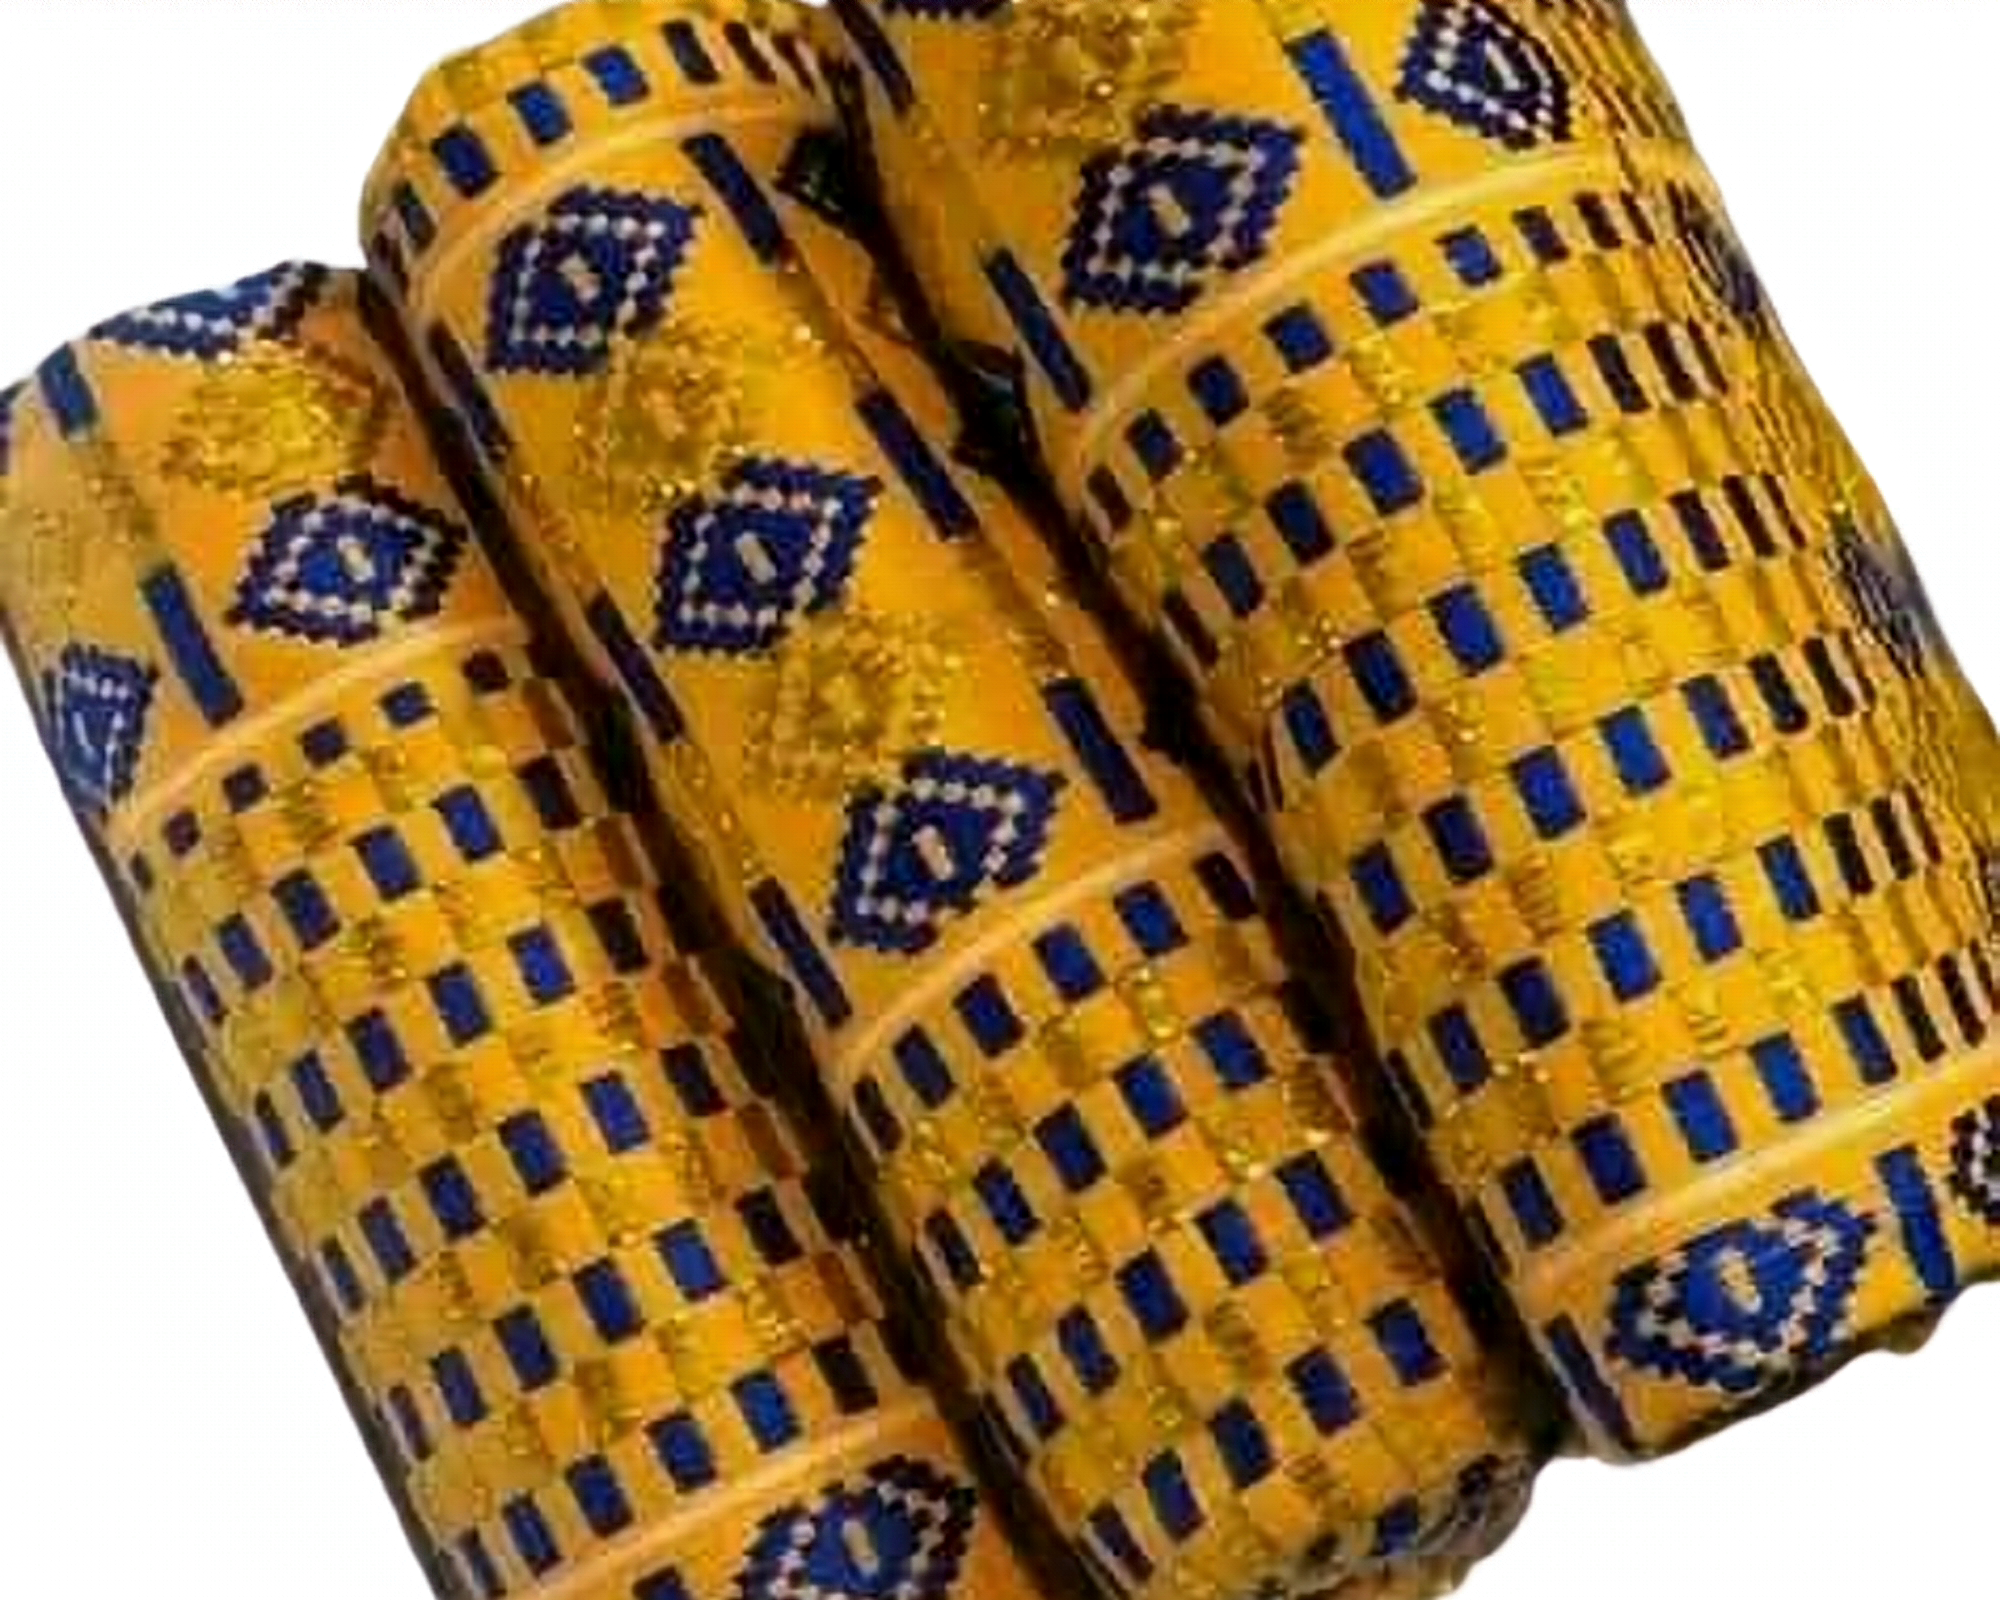 MG Authentic Hand Weaved Kente Cloth A2519